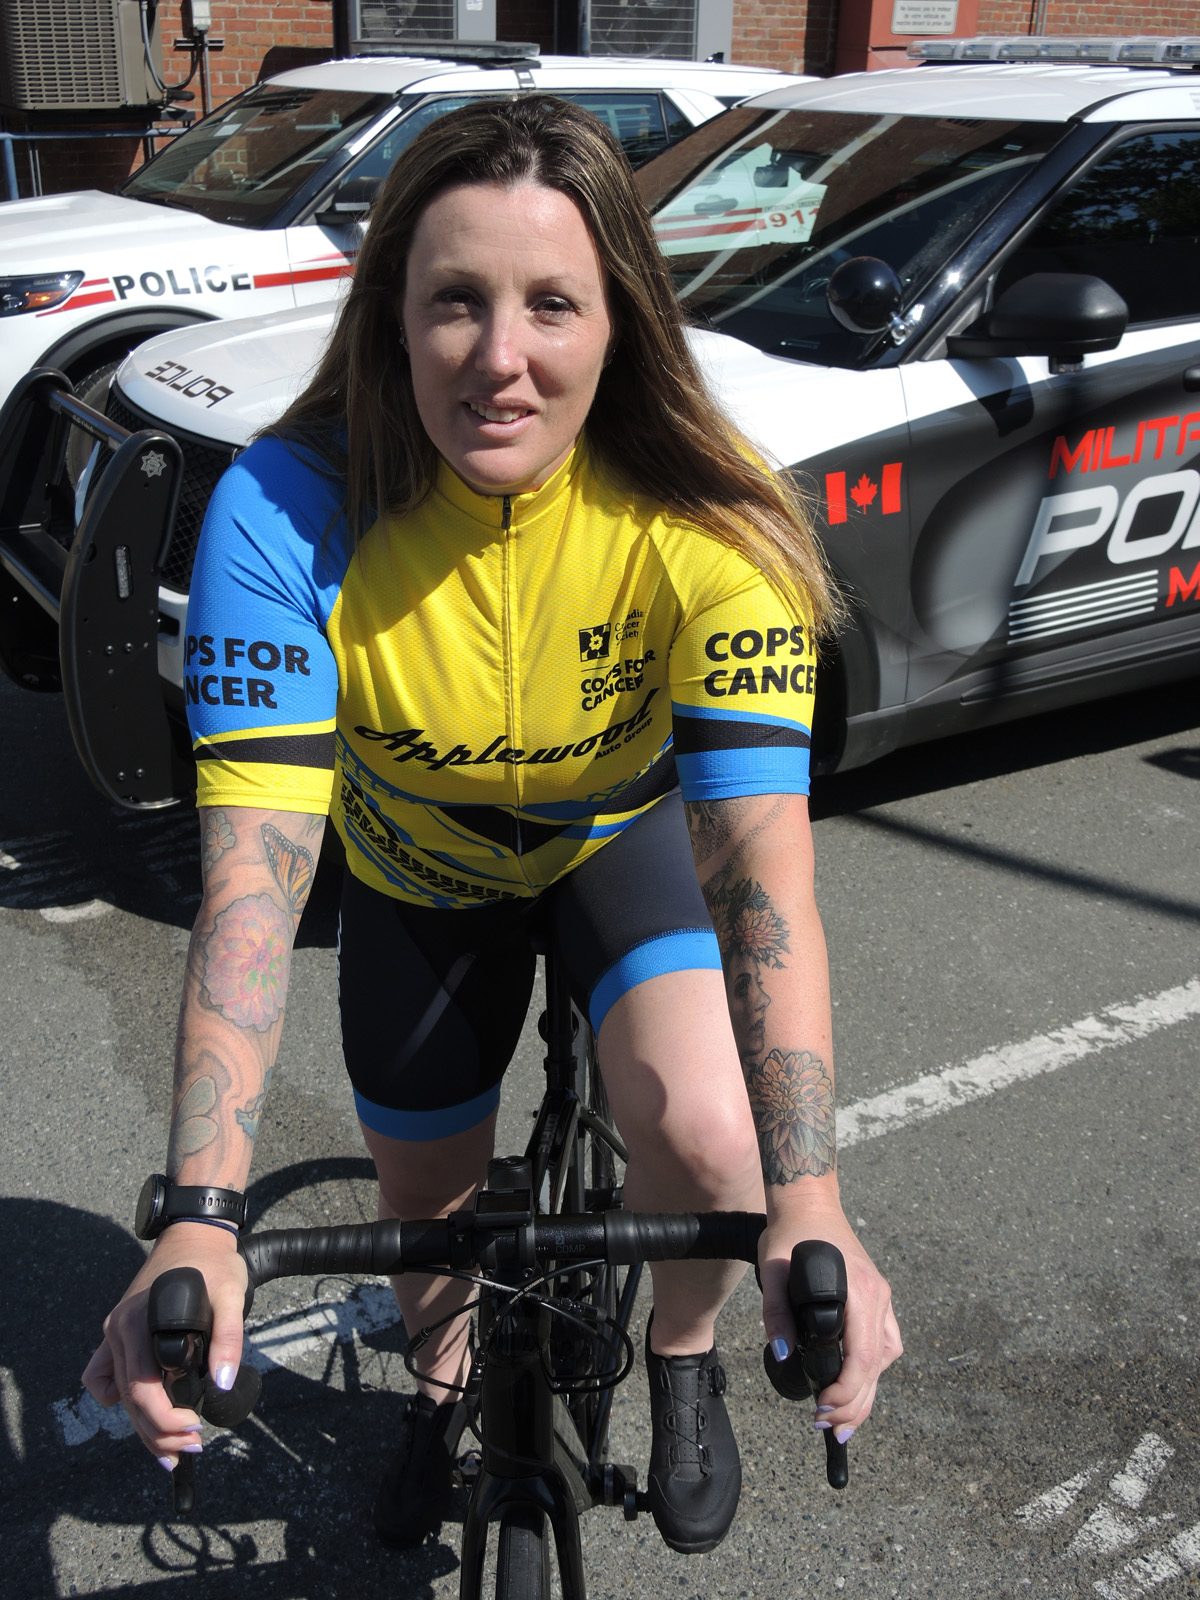 To support Cpl Larkin’s fundraising efforts, visit her Cops4Cancer webpage: bit.ly/3CwW3LZ